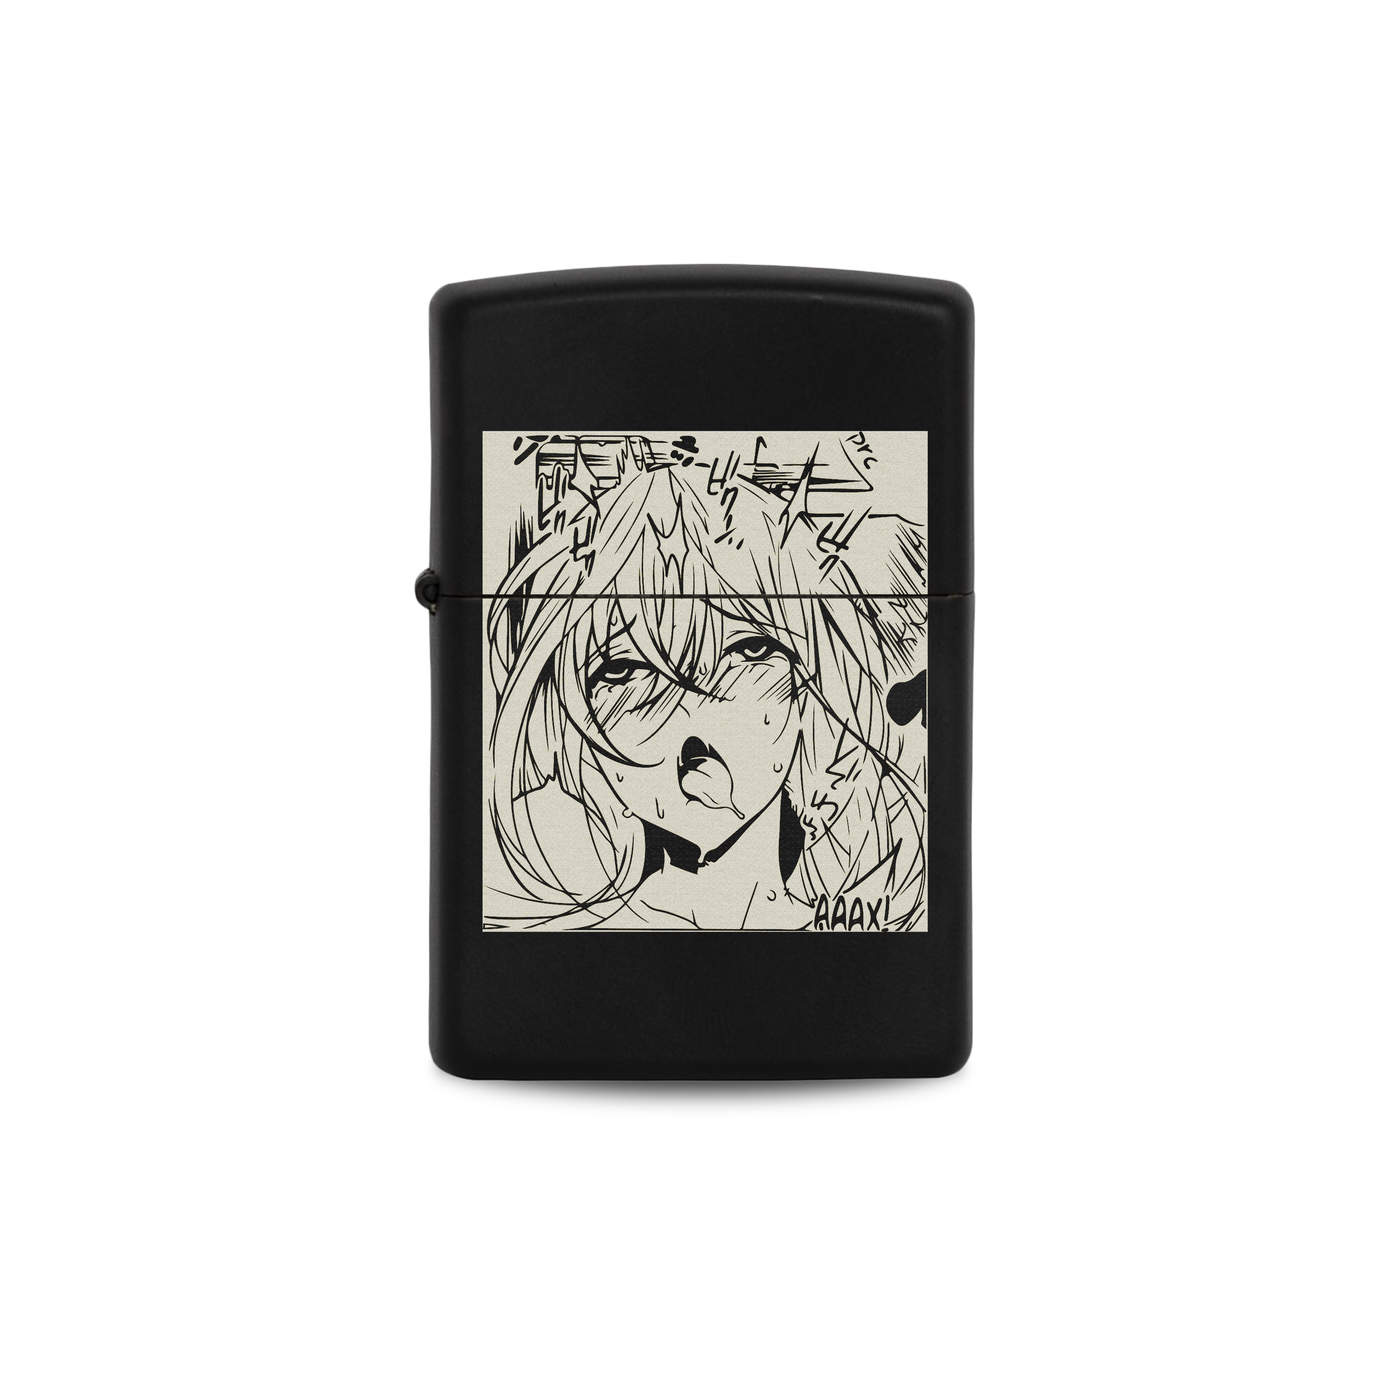 Amazon.co.jp: Lighter Case, Stylish, Anime Pattern, Character Pattern,  Tokyo Ghoul Ken Kaneki, Lighter Cover / Storage Case, Lighter Protection,  Zippo Dedicated Use, Impact Resistant, Rust Resistant, Tobacco Tool,  Smoking Goods, Anime Lovers,